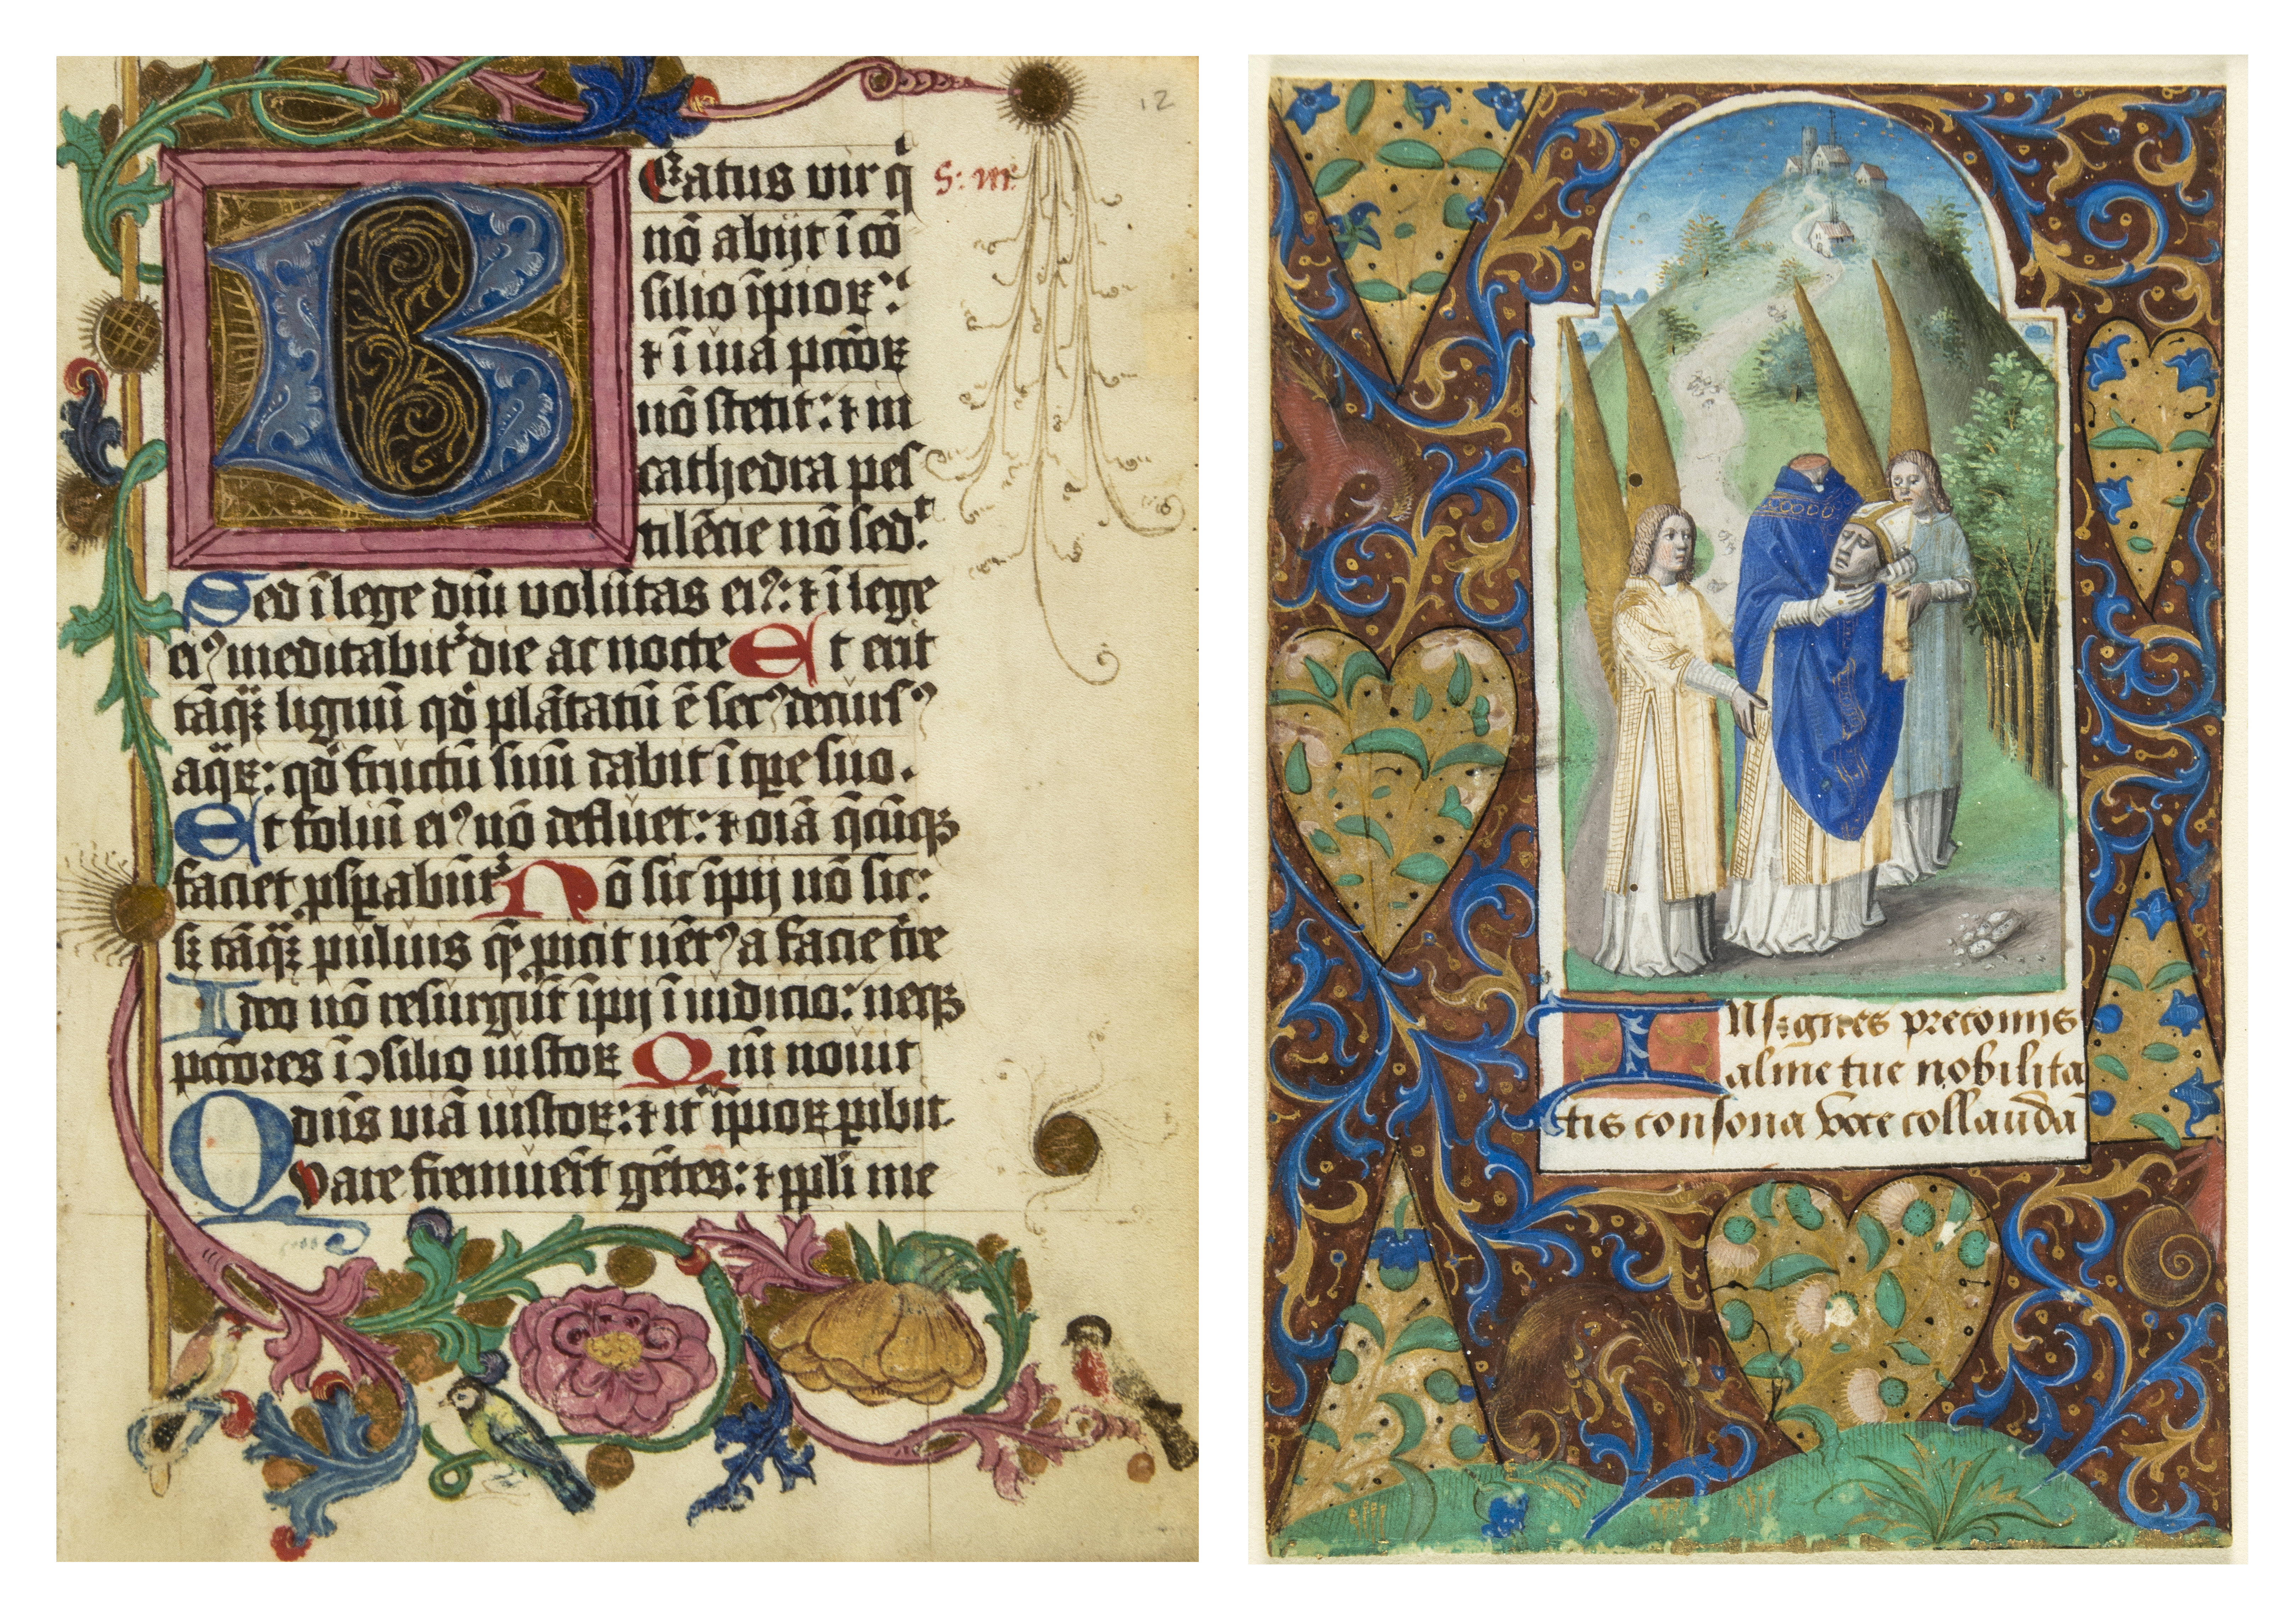 Psalter for Dominican Use (left), in Latin and German, illuminated manuscript on parchment, probably Nuremberg, dated 1473, 202 leaves. Estimate: £25,000–£35,000. St. Denis holding his severed head, large miniature on a leaf from a ‘Book of Hours,’ northern France (Paris), circa 1480. Estimate: £4,000–£6,000. Bloomsbury Auctions images